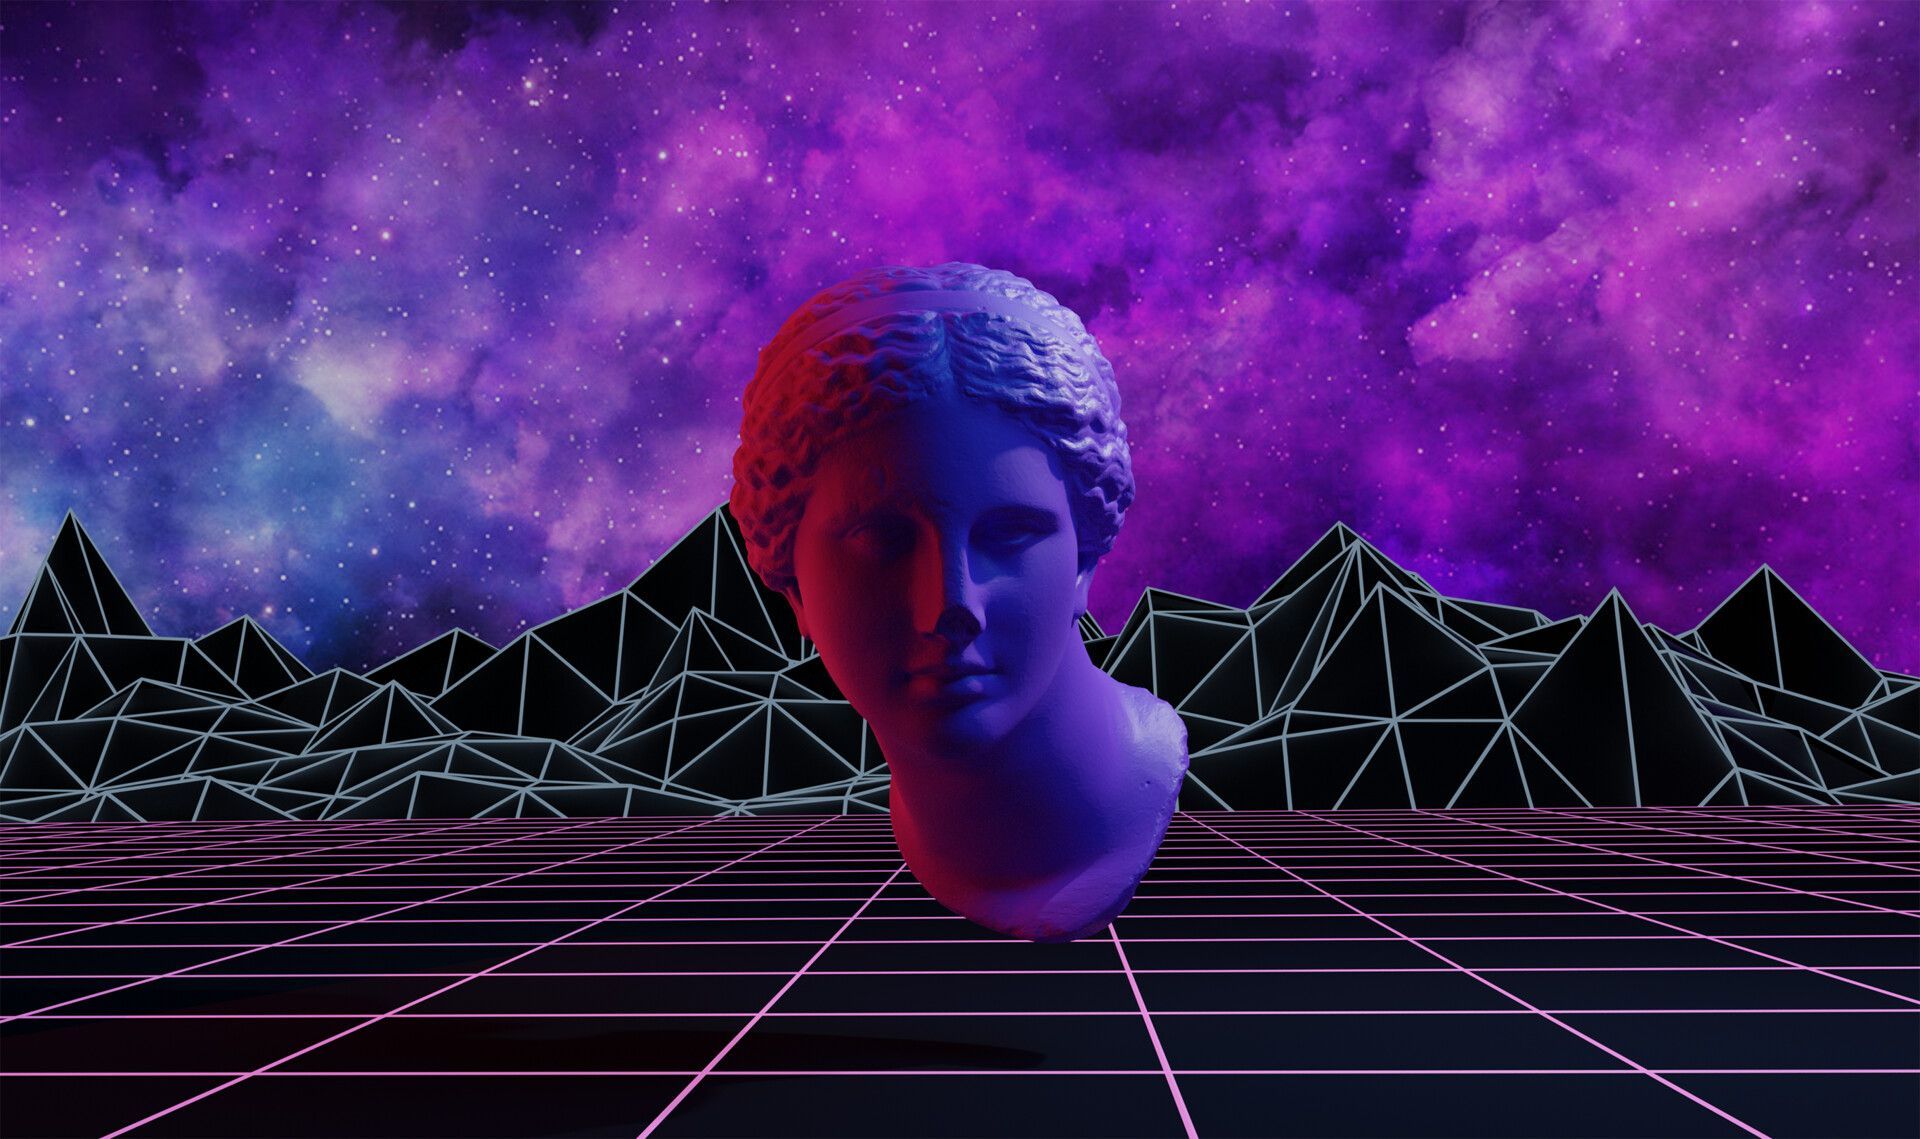 Vaporwave style image of a bust of Venus in front of a purple sky with pink mountains. - Venus